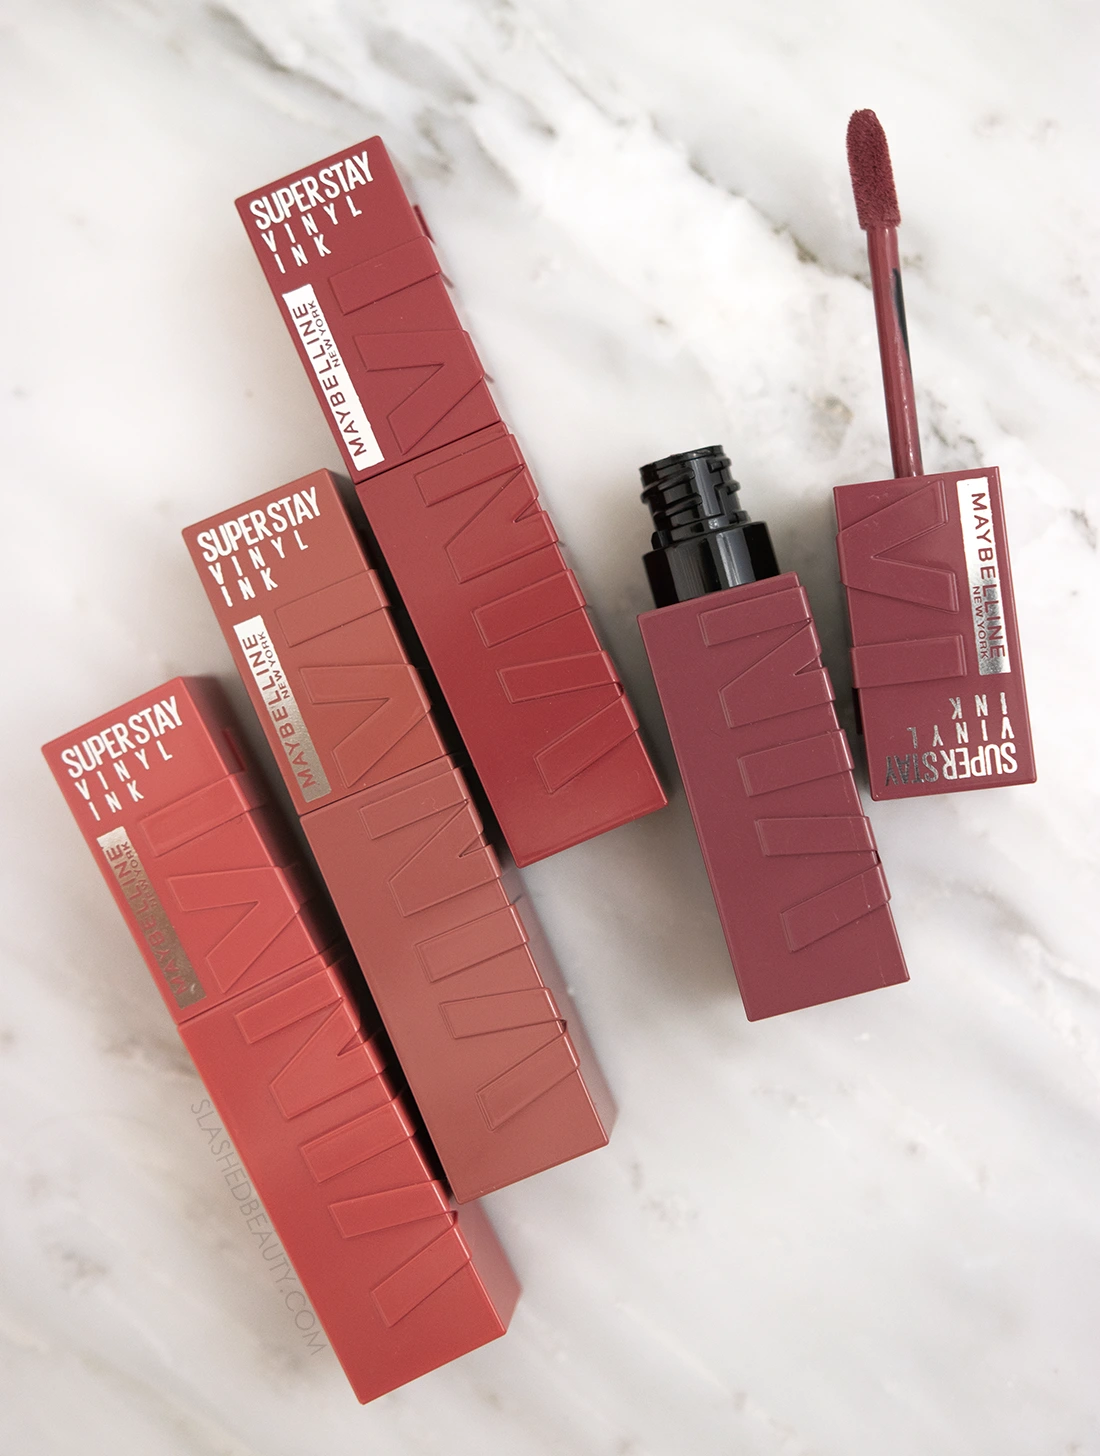 Tubes of Maybelline Superstay Vinyl Ink Liquid Lipstick lying flat on a marble surface | Maybelline Superstay Vinyl Ink Liquid Lipsticks Review | Slashed Beauty